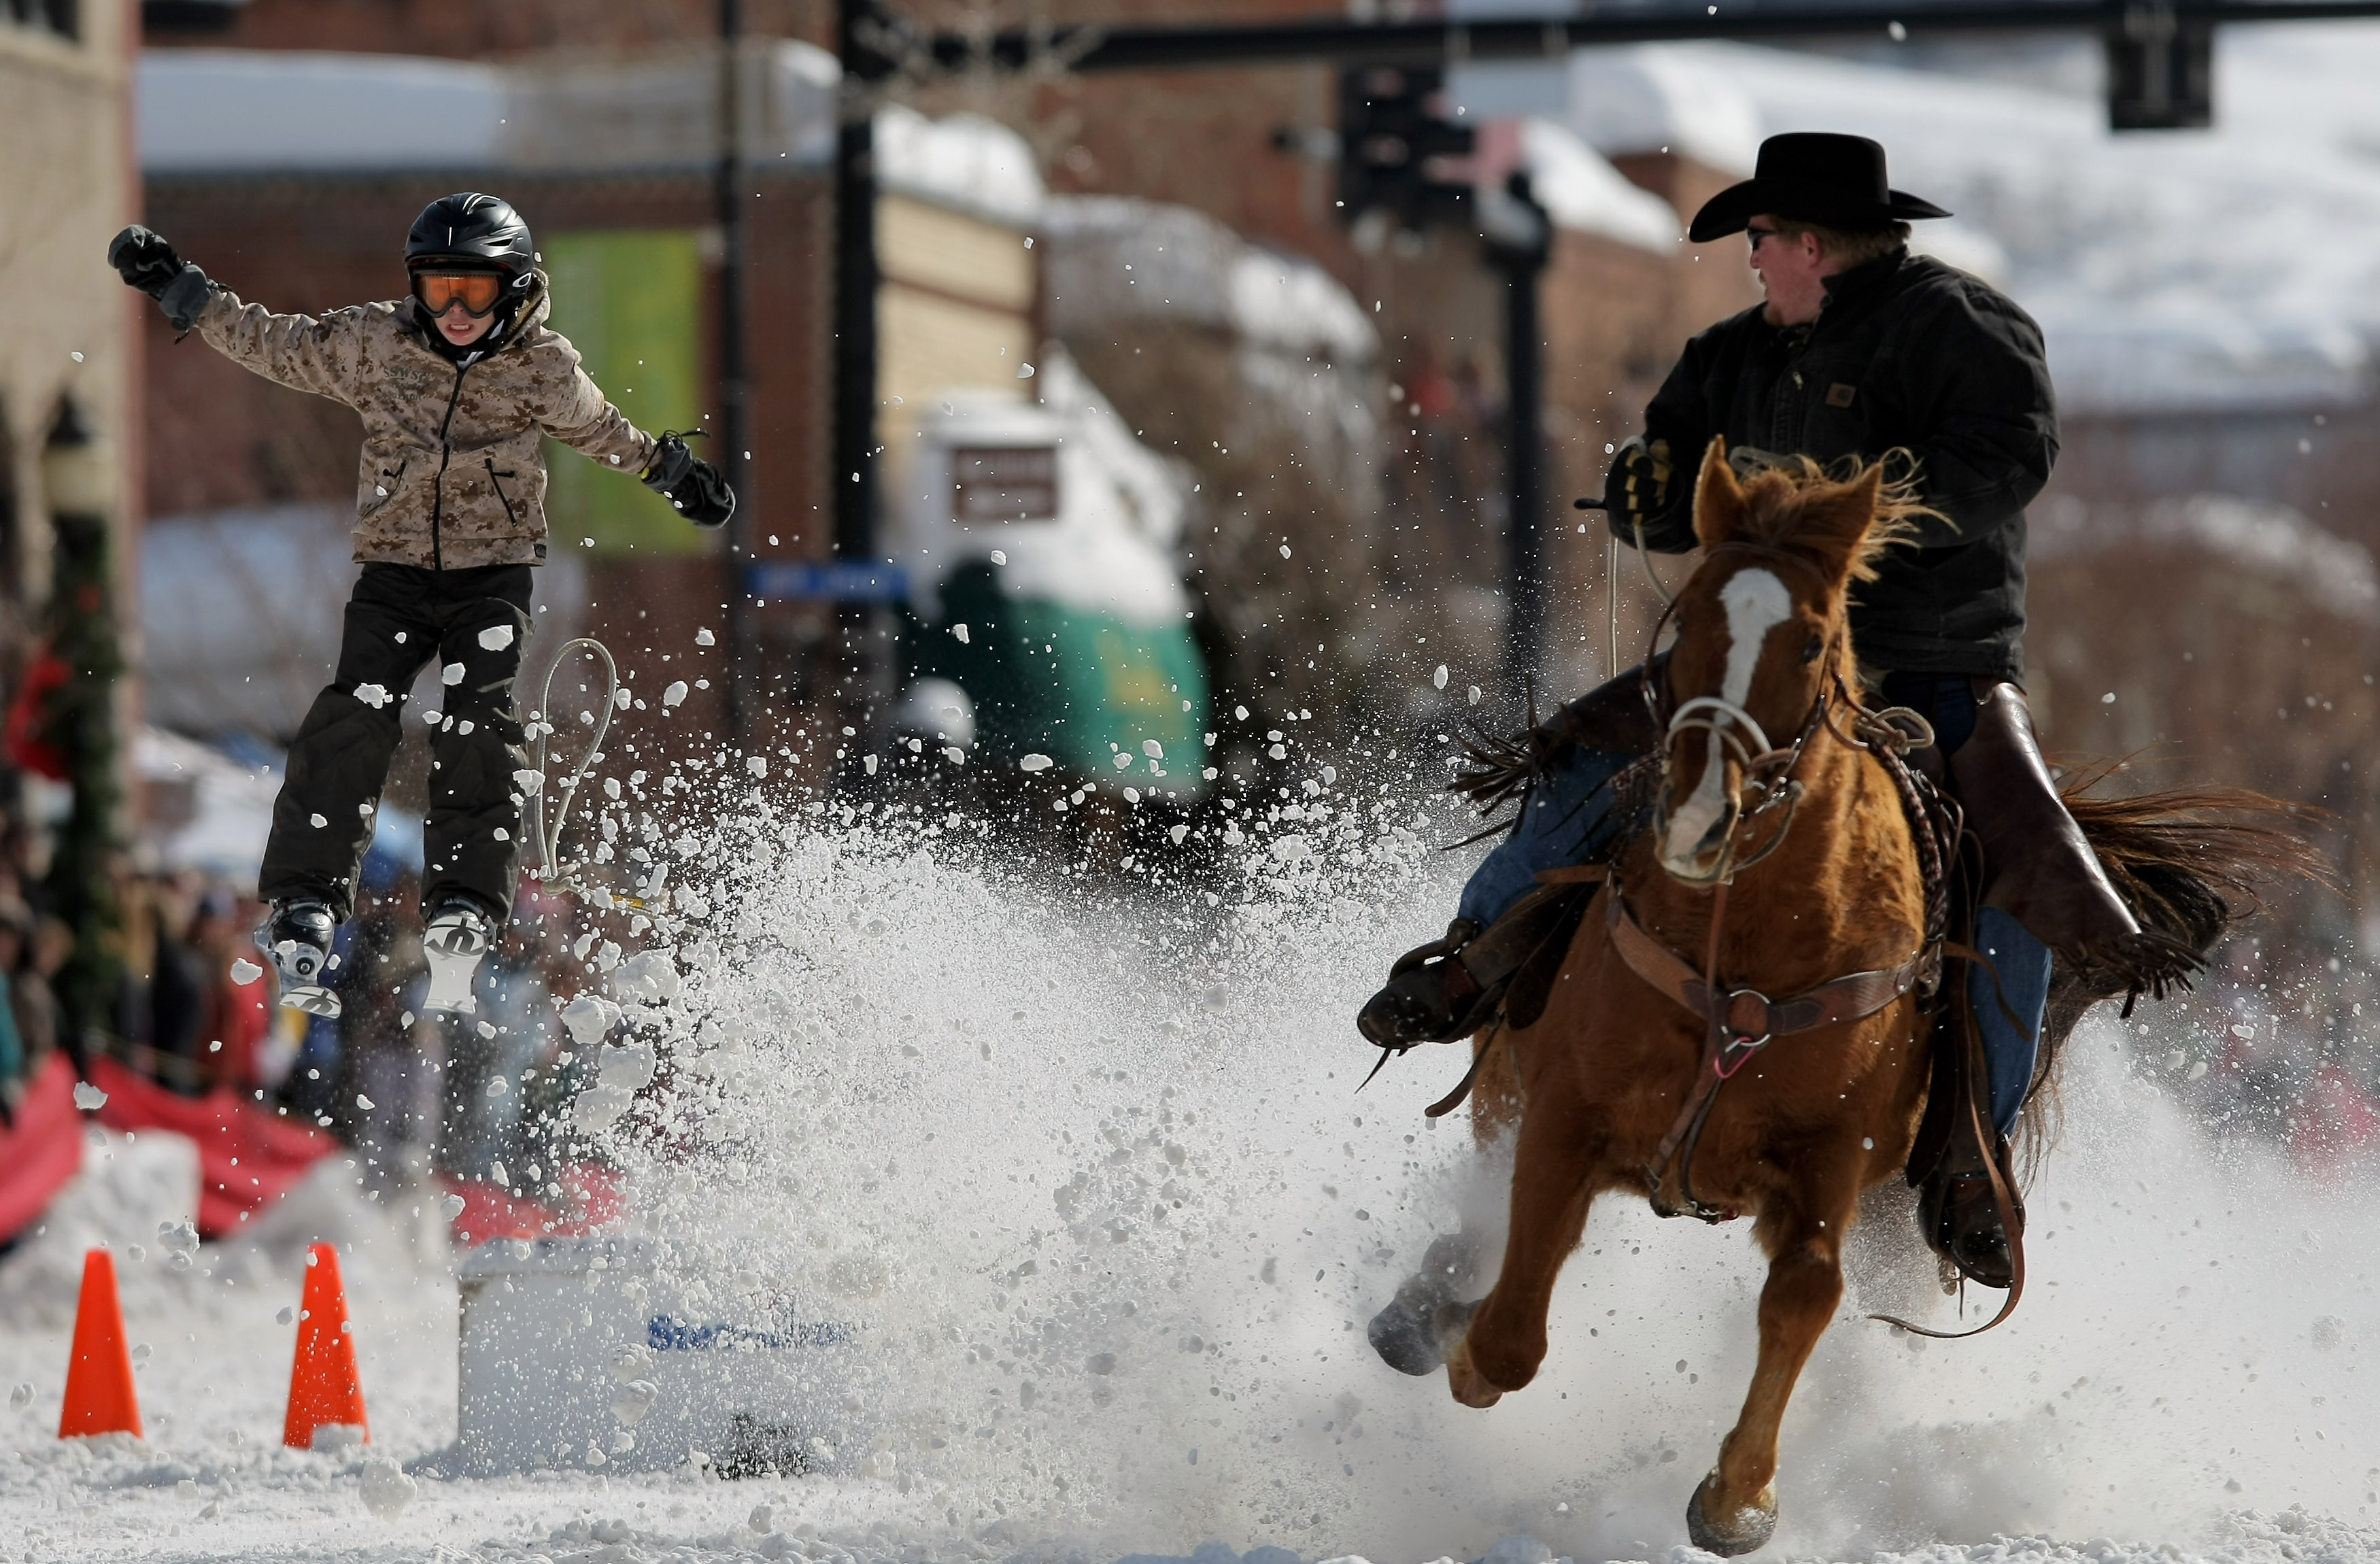 Man riding horse and pulling skier in Steamboat Springs